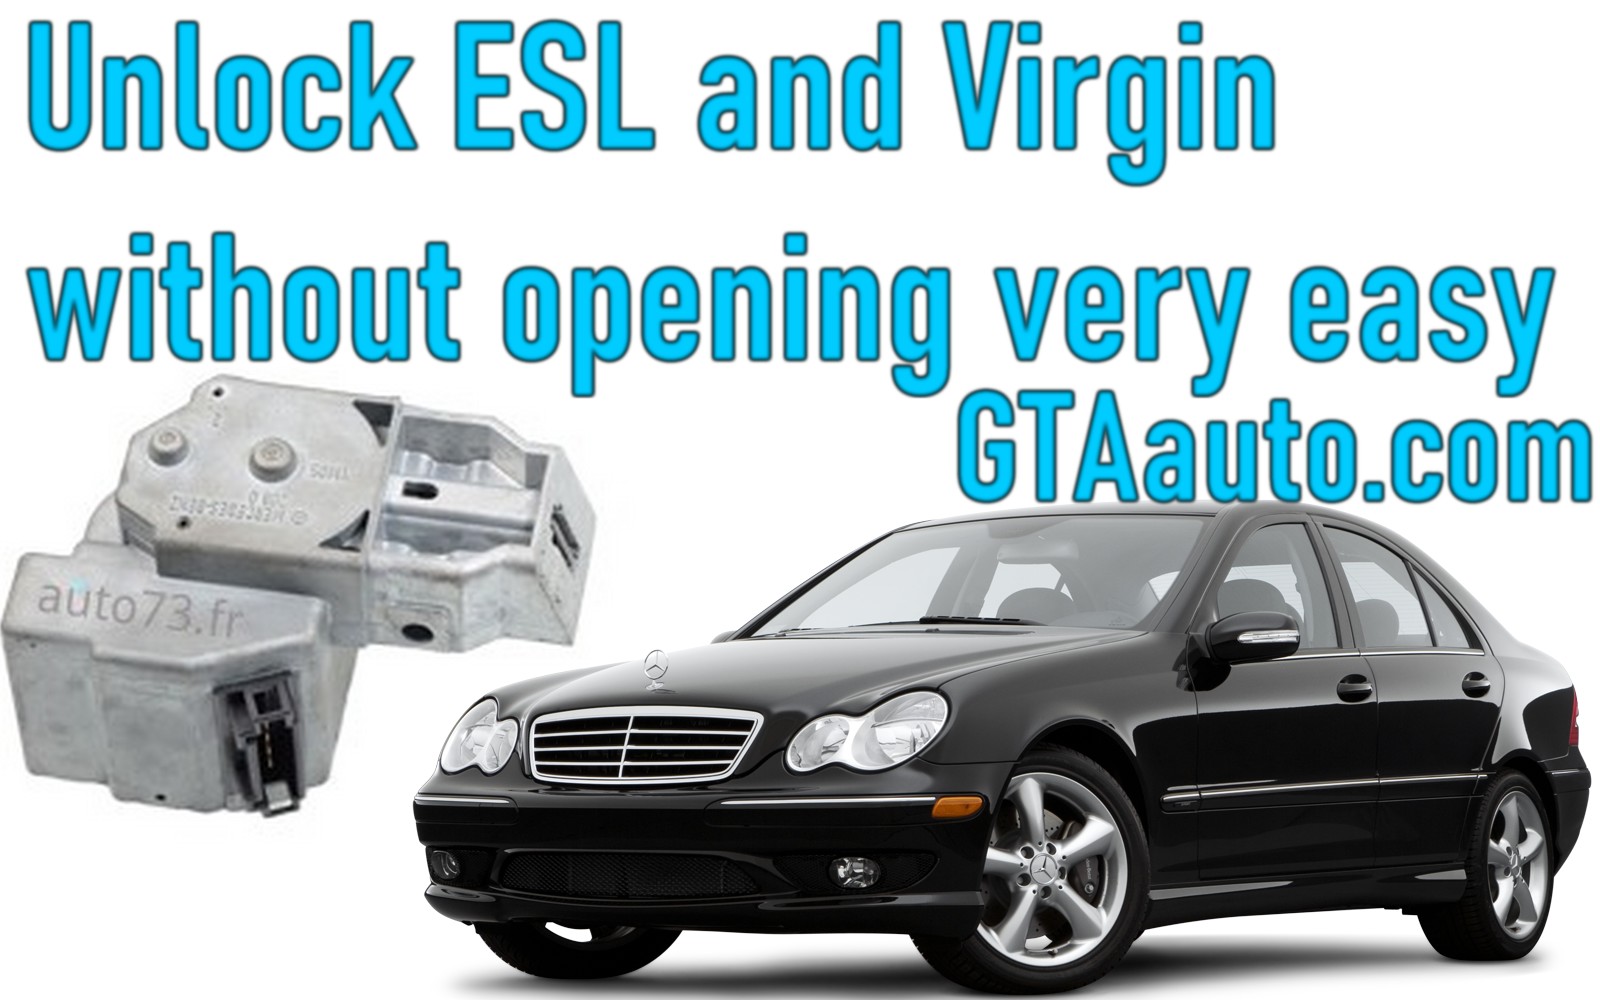 AVDI unlock ESL / ELV and virgin without opening very easy 1 Sans titre 1